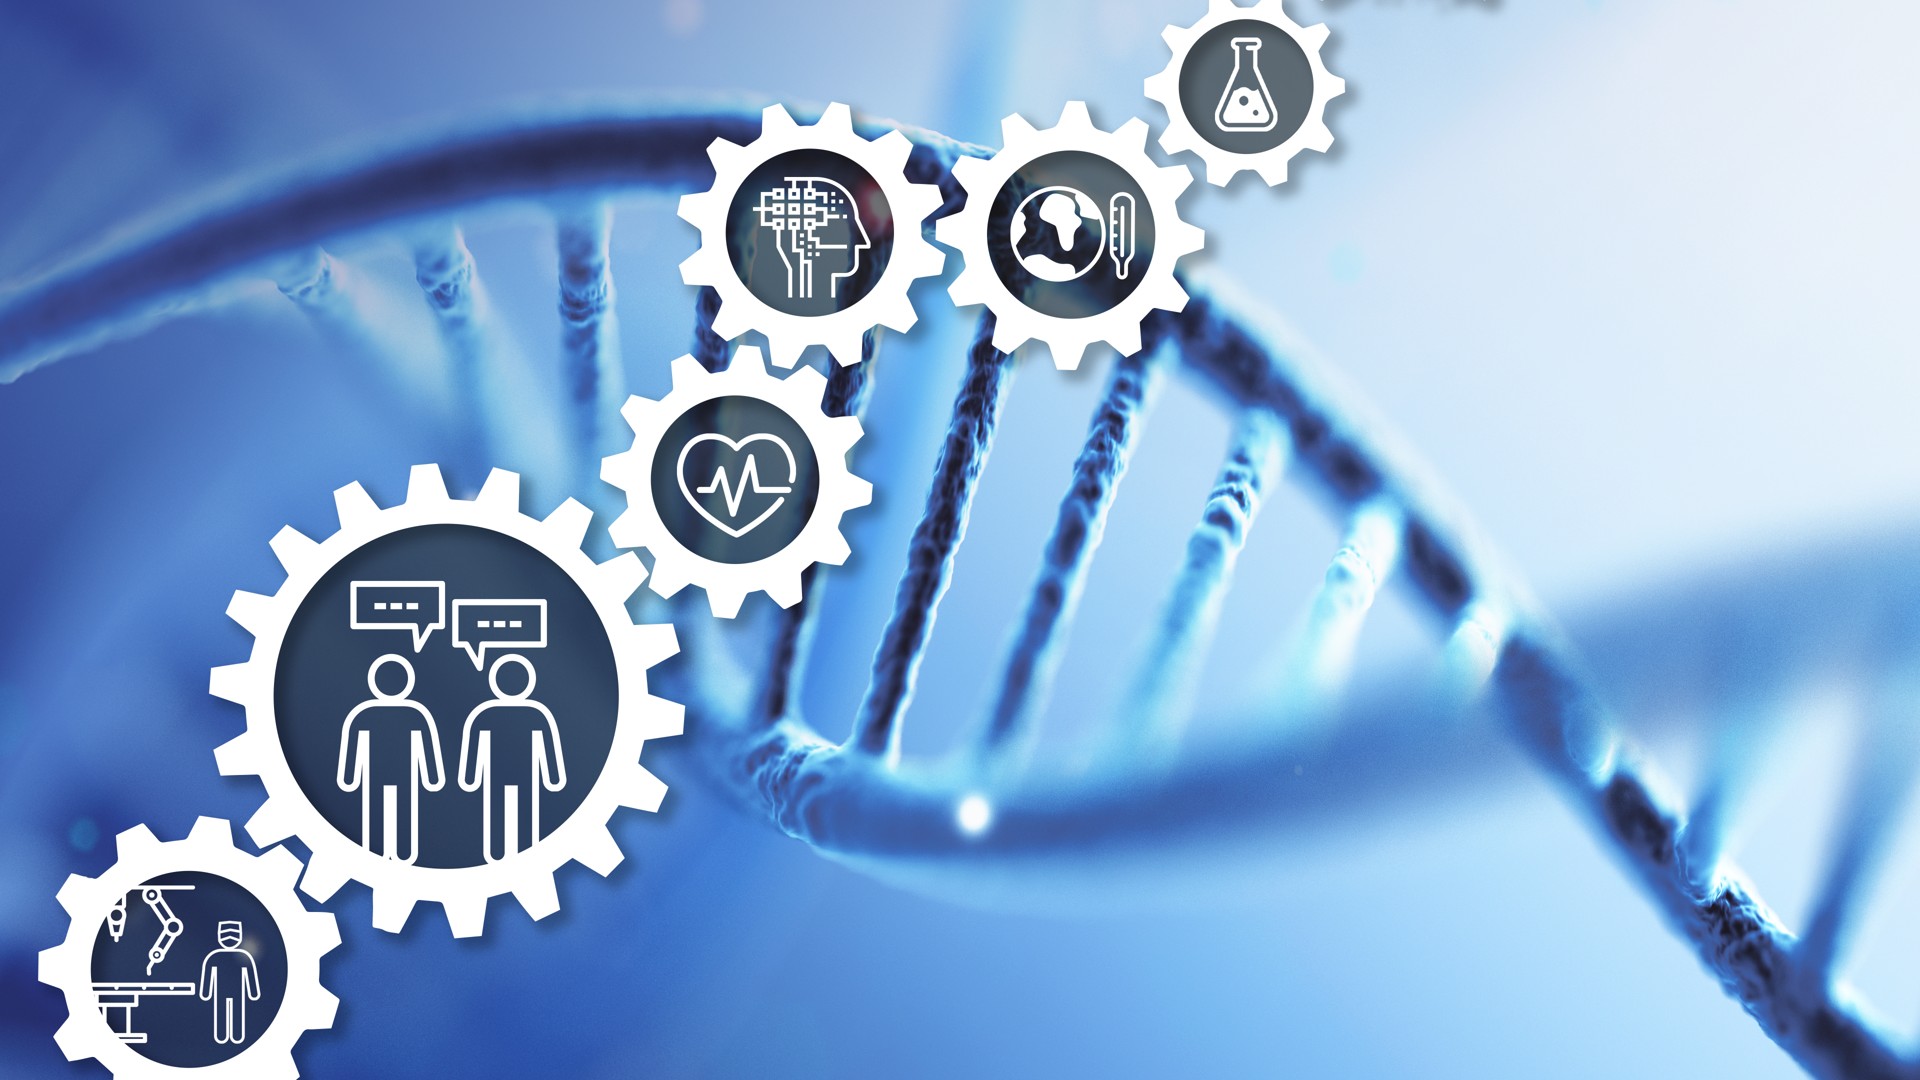 Blue DNA photo with icons symbolising health engineering